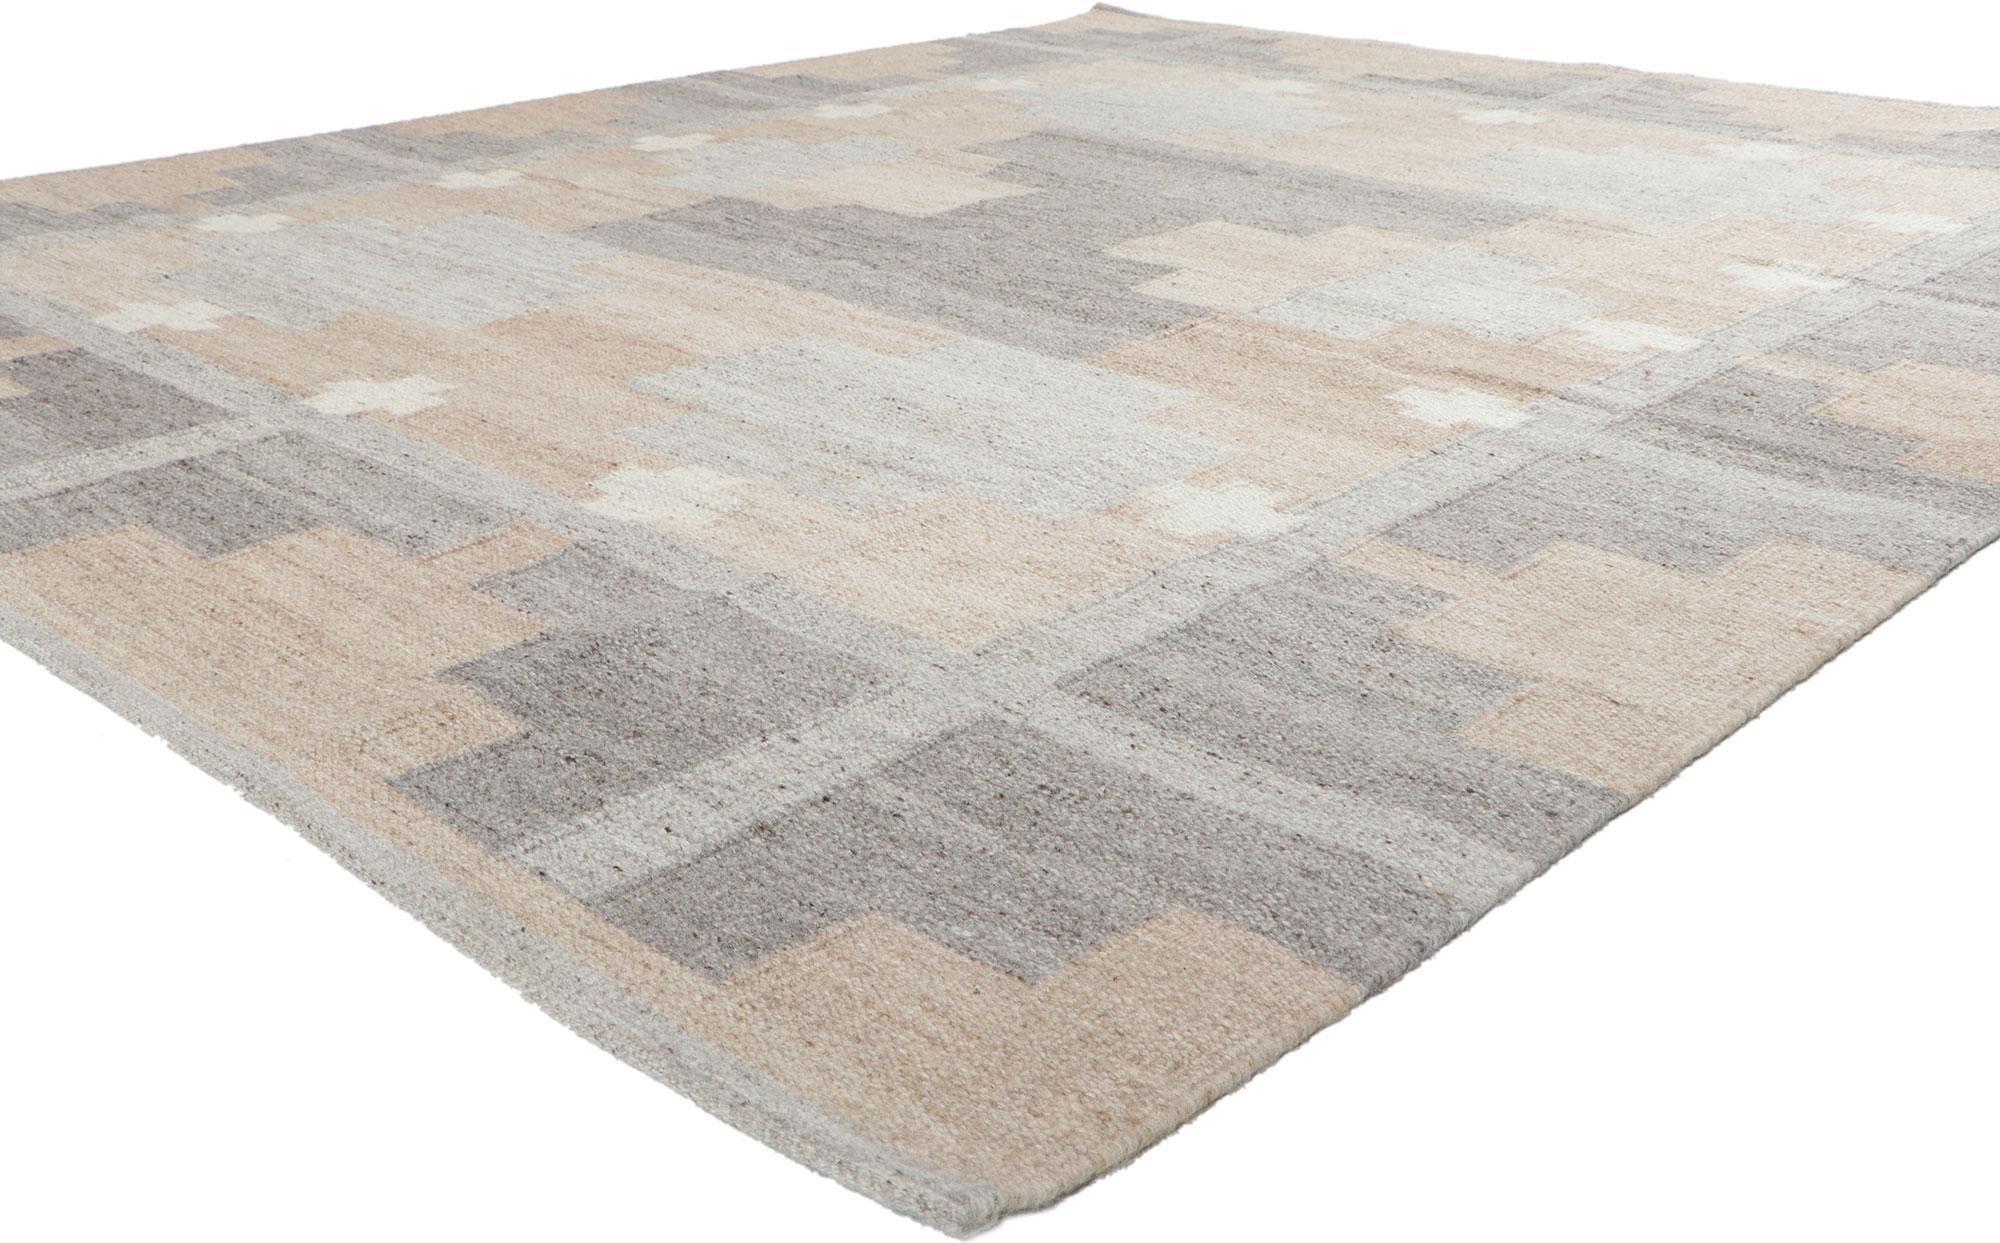 30966 New Swedish Inspired Kilim Rug In the Style of Storsjön by Ingegerd Silow, 08'02 x 09'10. ?Emanating Scandinavian Modern style with incredible detail and texture, this handwoven Swedish inspired kilim rug is a captivating vision of woven